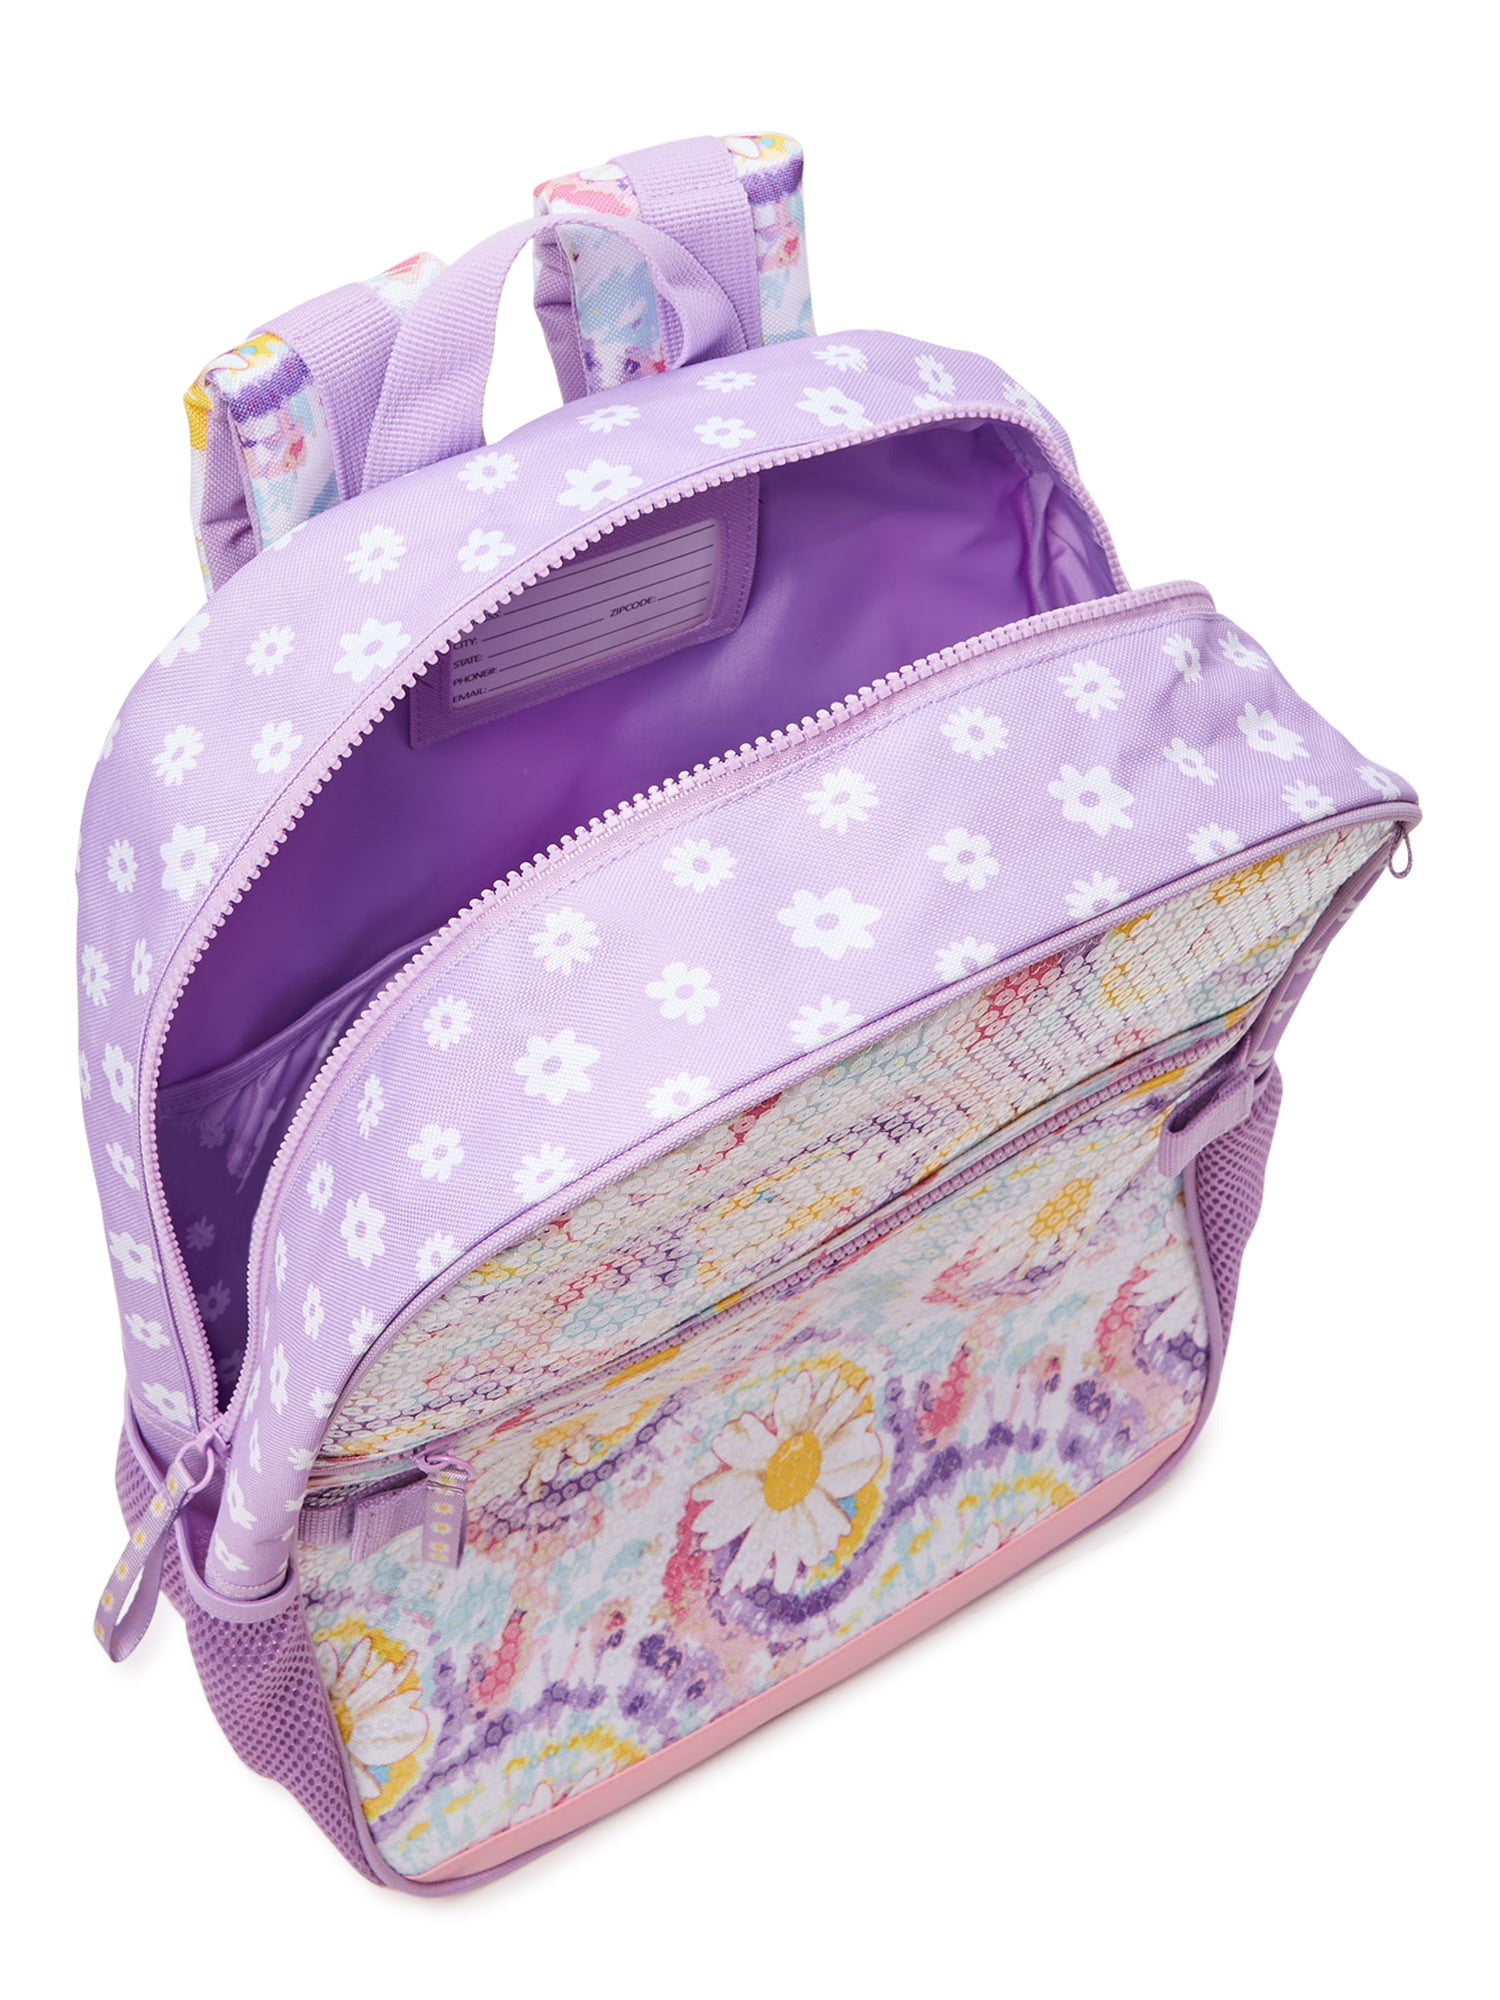 Wonder Nation Children's Backpack with Lunch Box and Pencil Case 3-Piece  Set Pink Leopard Tie Dye 